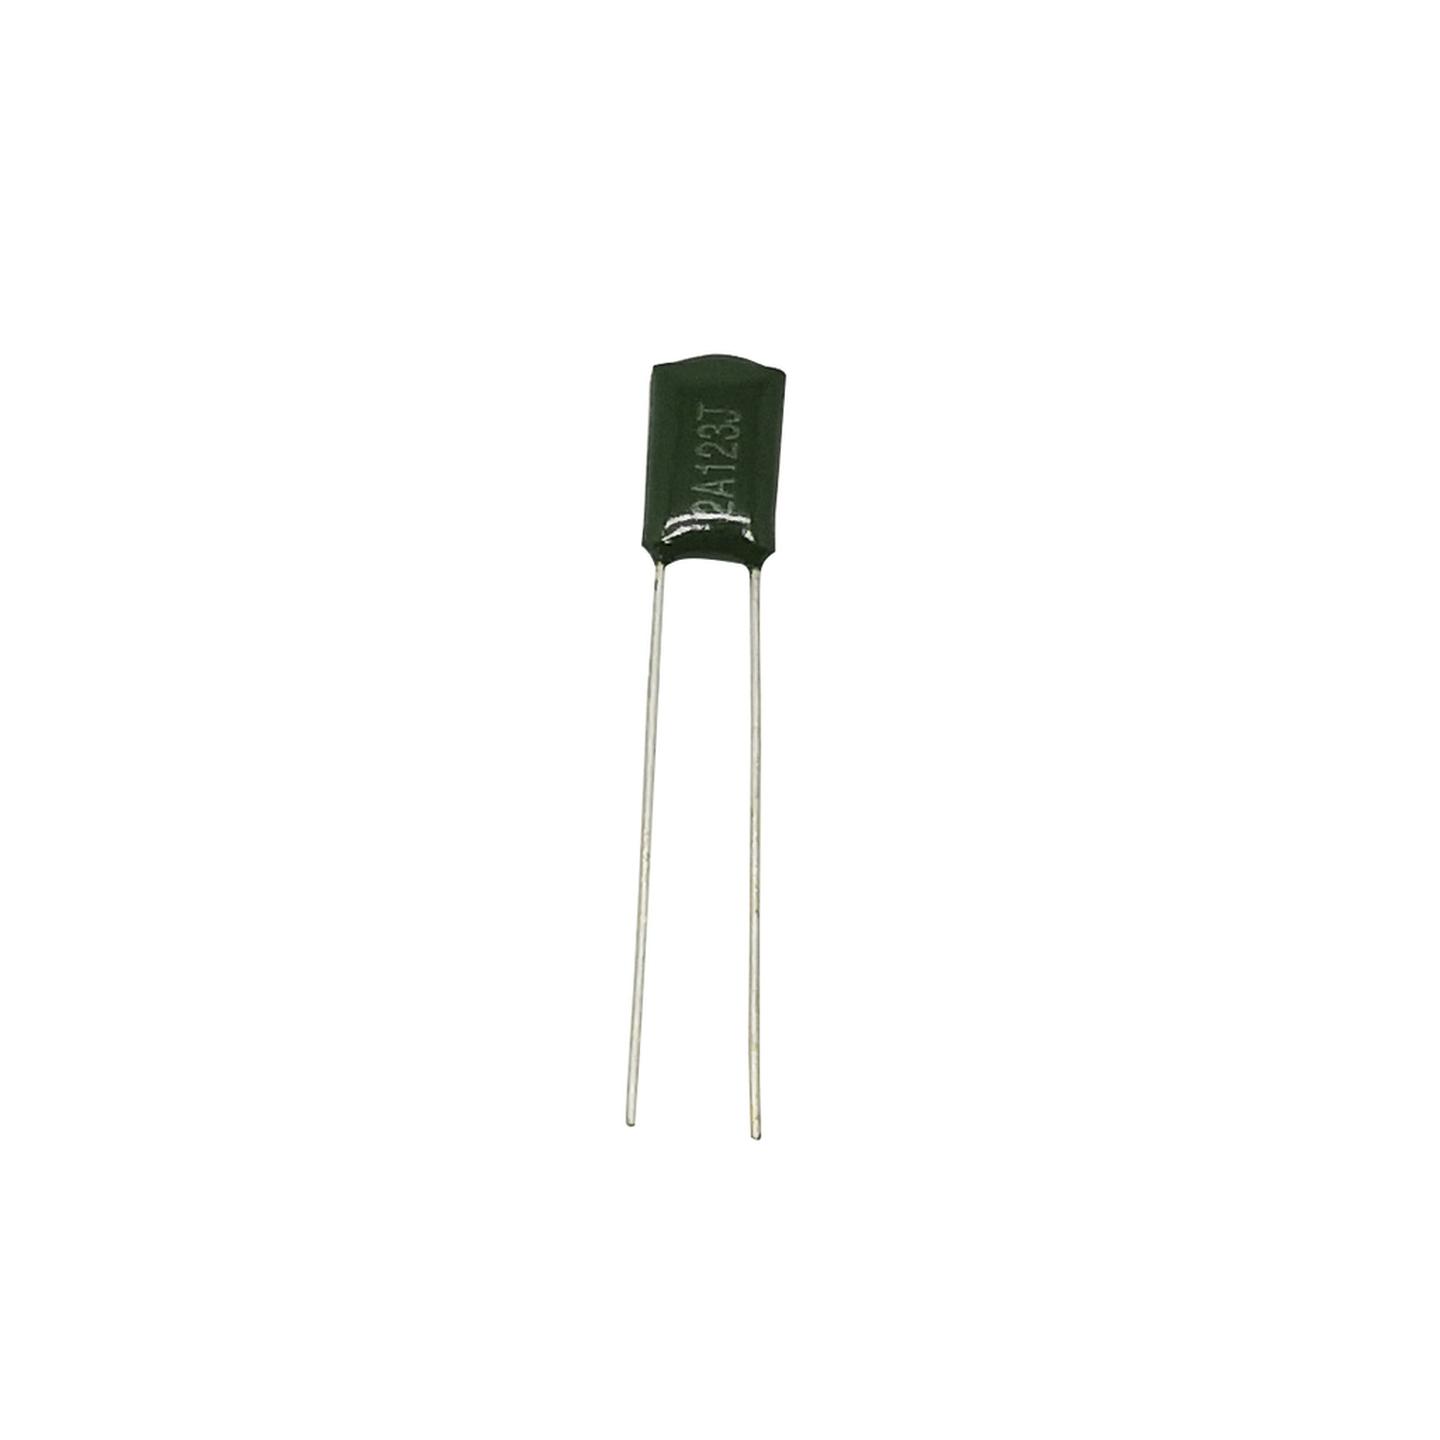 12nF 100VDC Polyester Capacitor